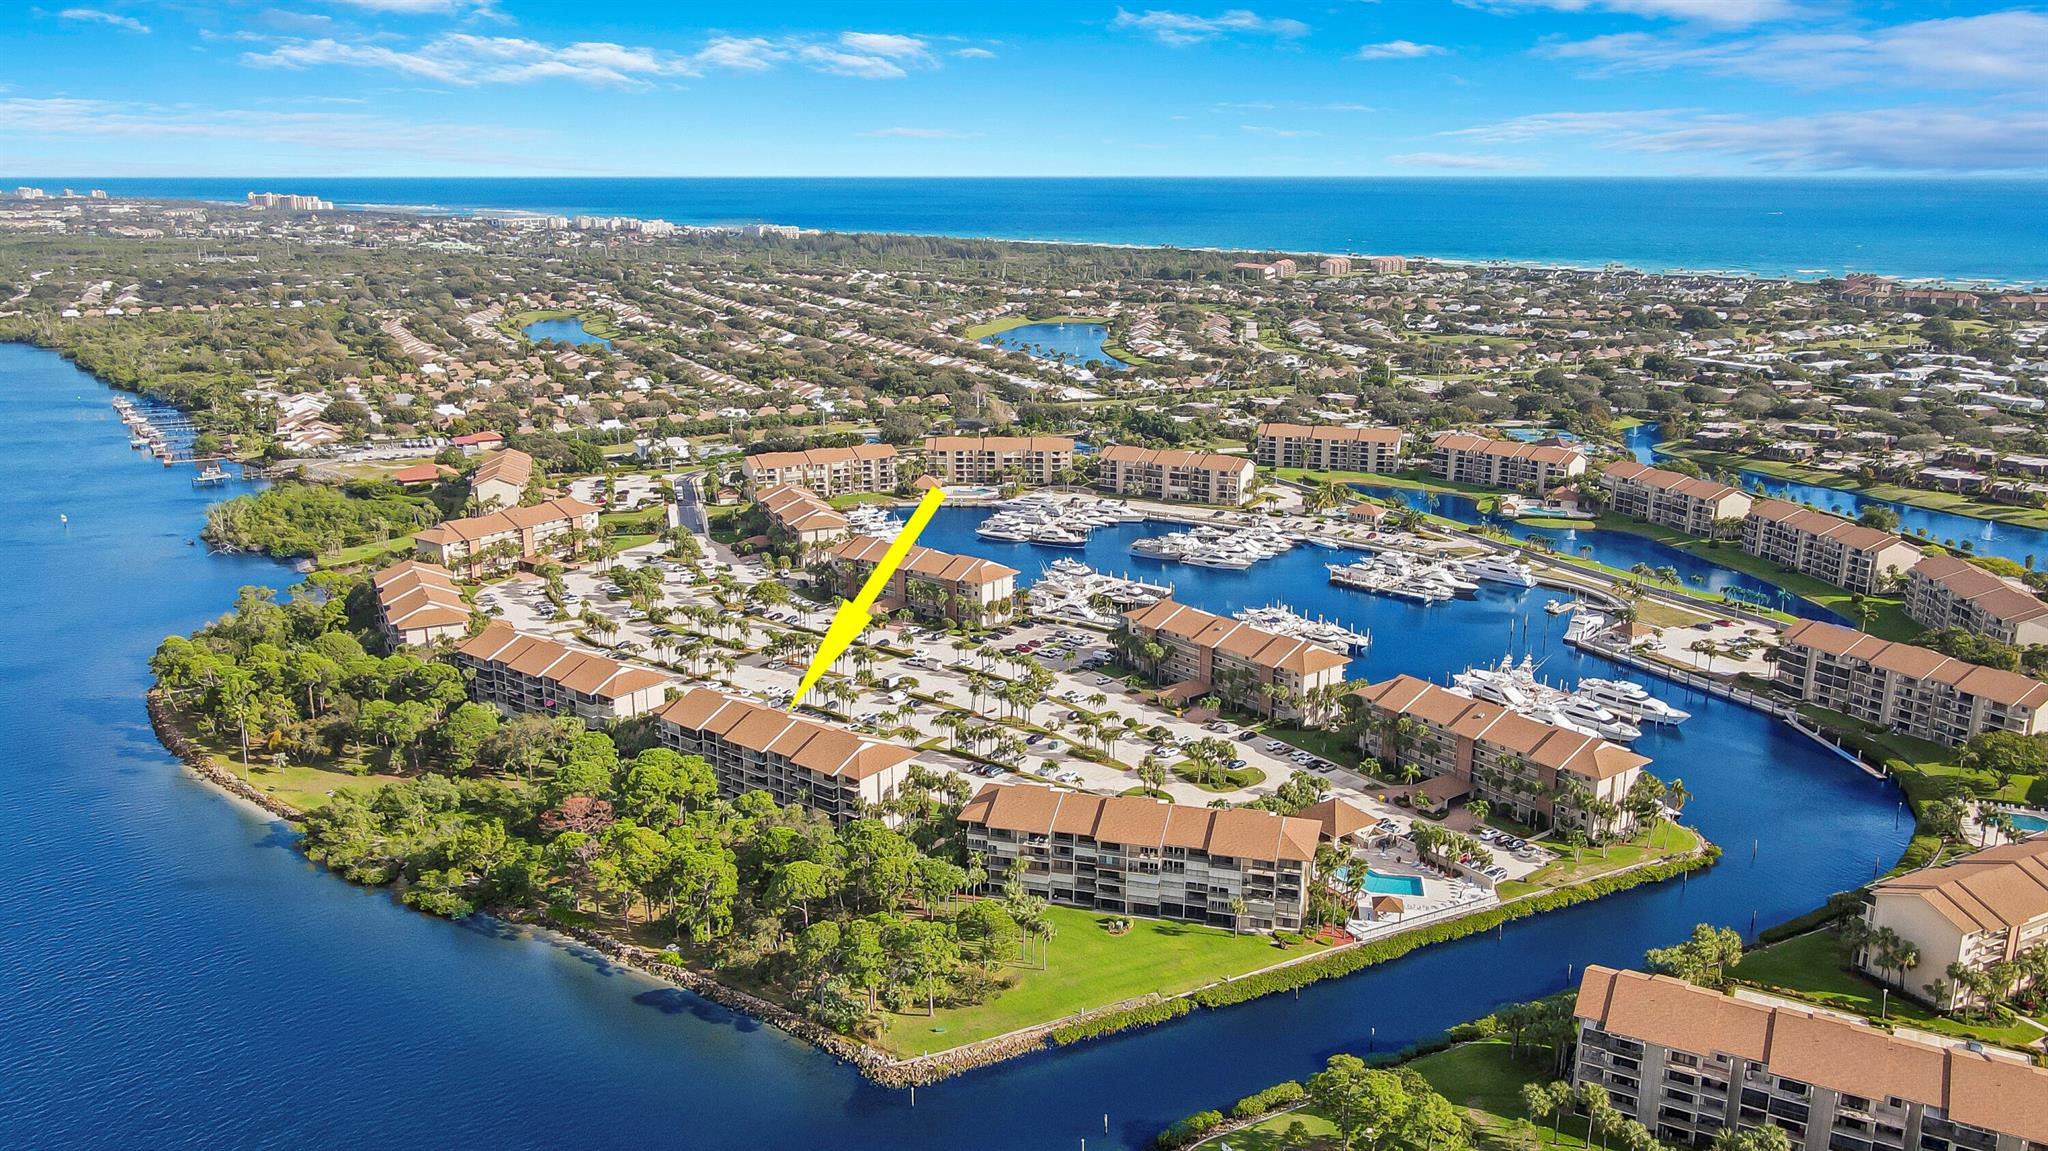 LIVE THE SOUTH FLORIDA LIFESYTLE!  Highly Sought After and Rarely Available FIRST FLOOR END UNIT ON THE INTRACOASTAL!  Relax at the COMMUNITY SANDY BEACH. Take in the Boat Activity, Sights and Sounds of Nature or Grab your Fishing Rod. Enjoy the Waterfront. Cook the Fresh Catch on 1 of the Community Grills and Savor at the Picnic Table. 4 HEATED POOLS/Clubhouses (2 Libraries) and many other Activities. LIGHTED TENNIS COURTS. Bocce Ball.  Hidden behind your front door is a VIEW THAT WILL TAKE YOUR BREATH AWAY. Unit has renovated kitchen, bath, flooring, SS Appliances. 2 Screened patios. Bonus Rm for Office, Storage, Guest Overflow.  WALK/BIKE TO JUPITER BEACHES, Restaurants, Grocers, Pharmacy, Etc.  20 Min to PBI. No need to Rent. Make this your Full Time or Winter Home. JUPITER HAS IT ALL